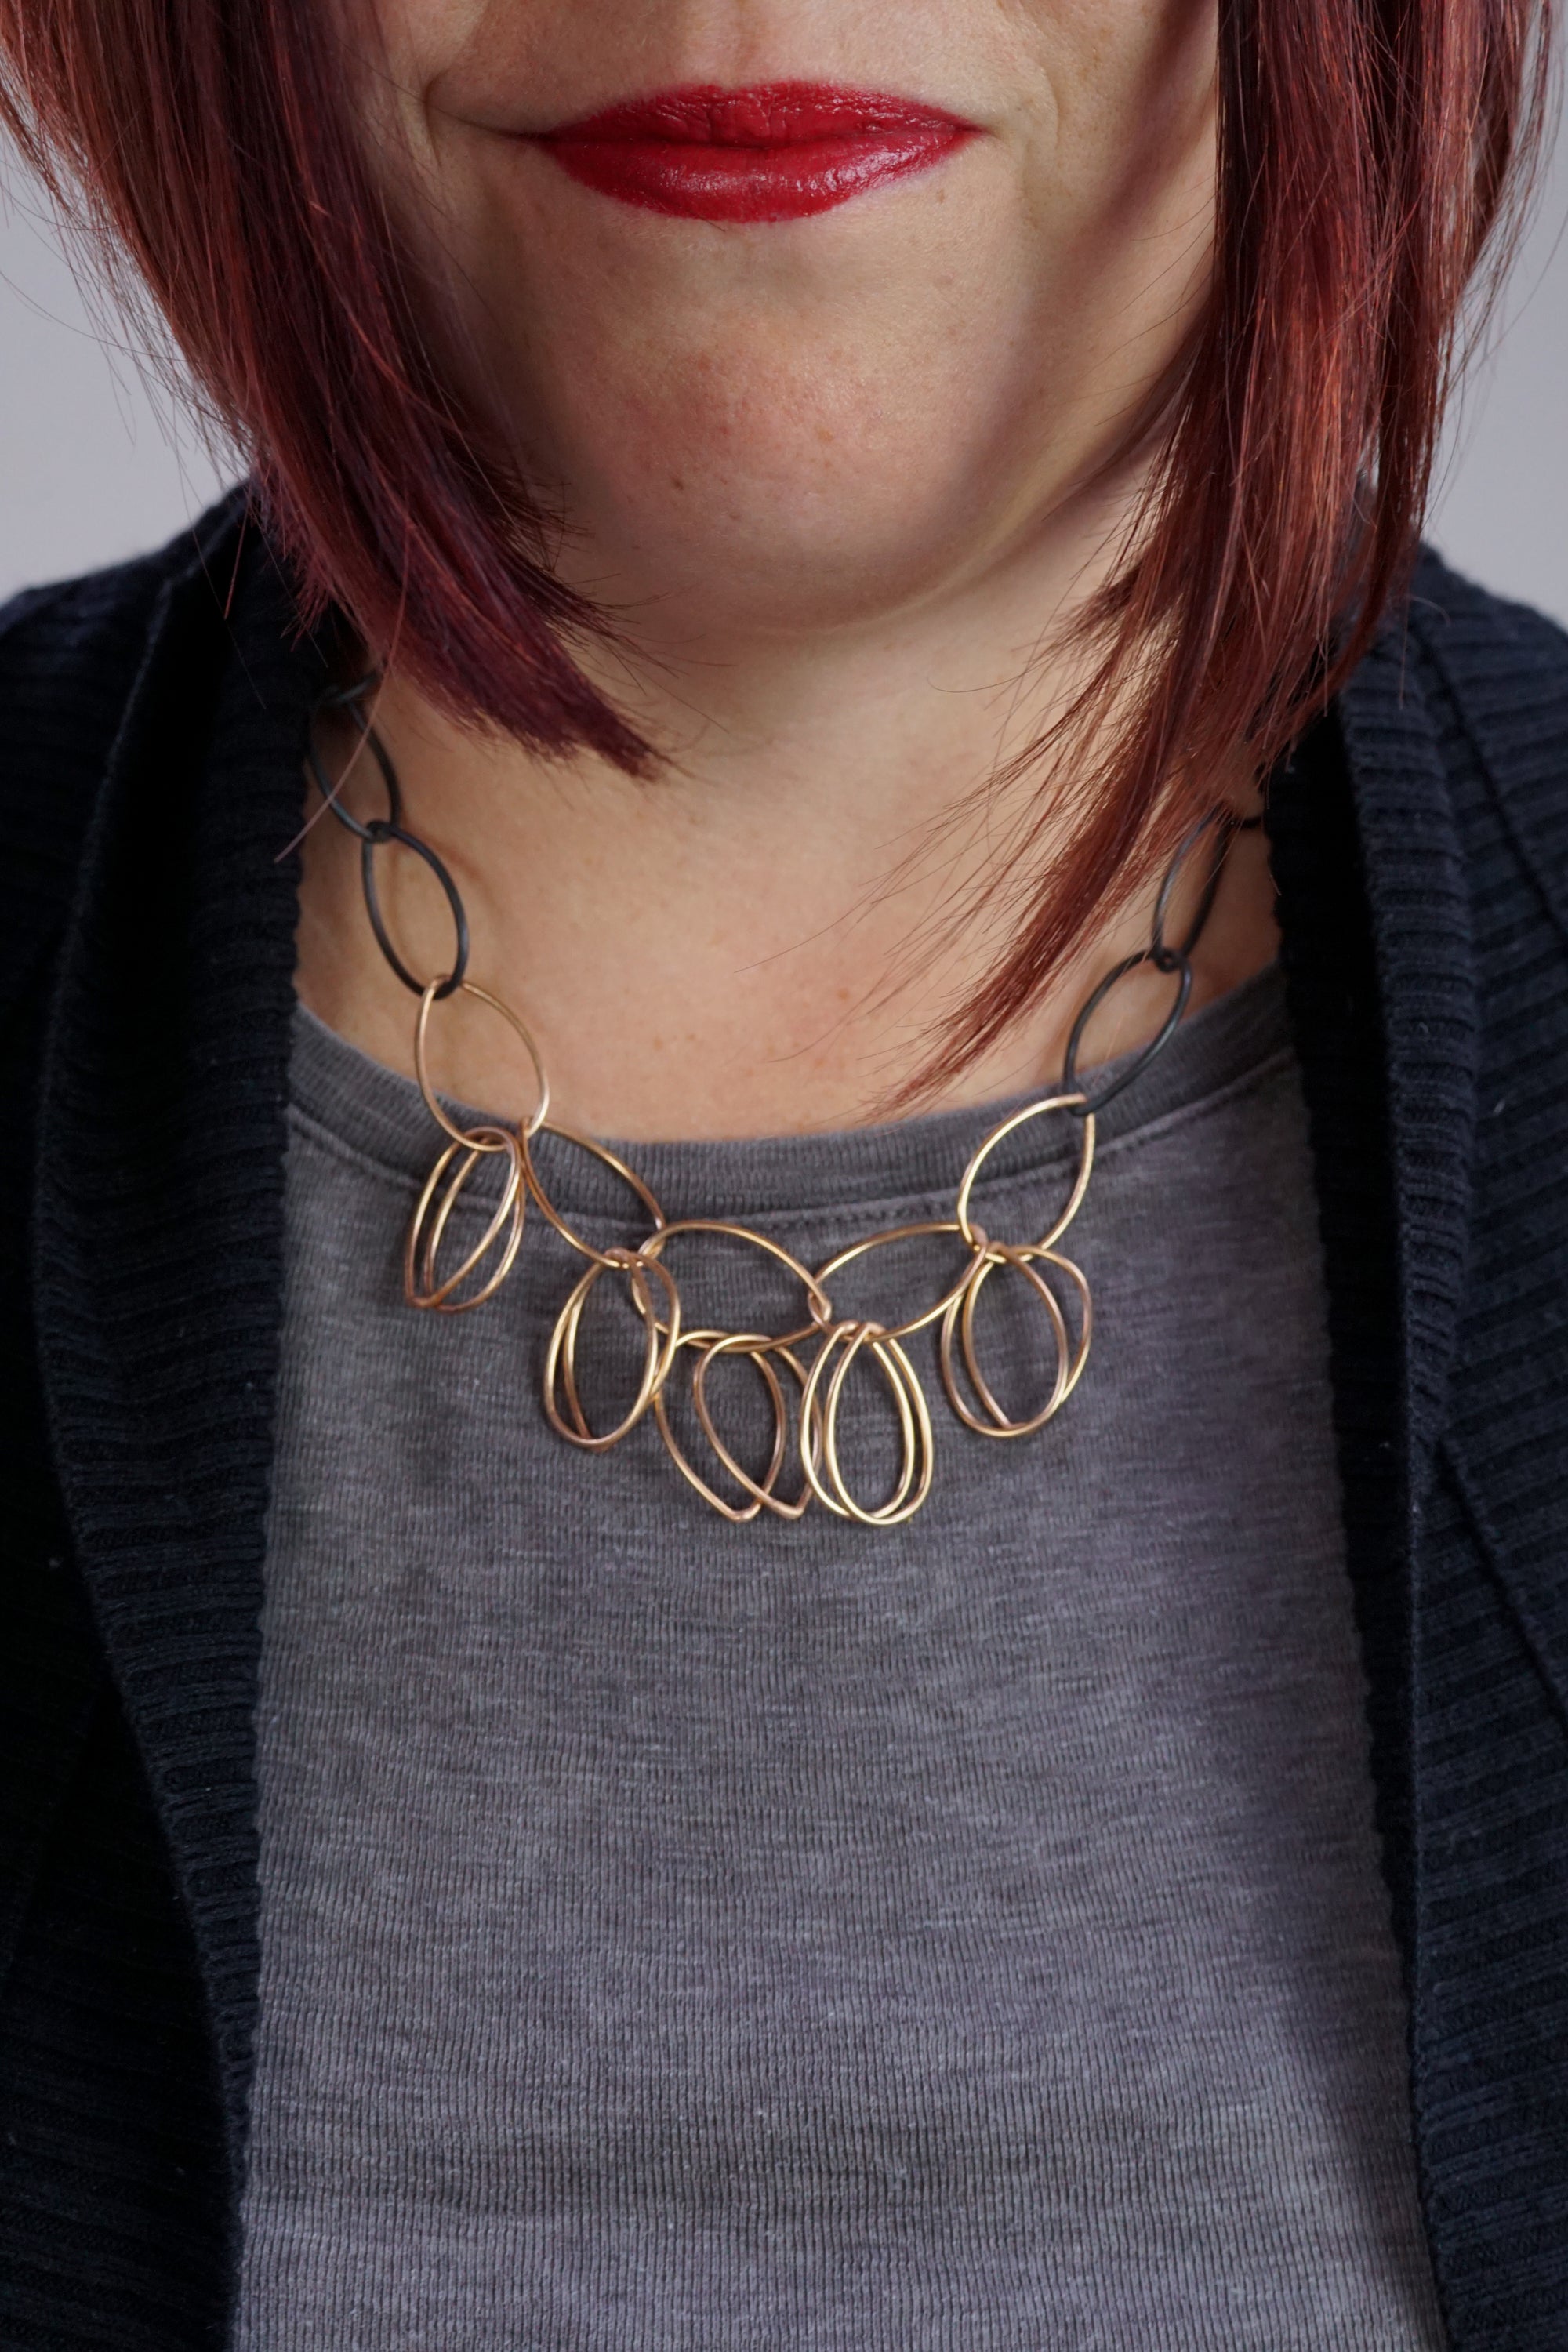 Ilhan necklace in steel and bronze